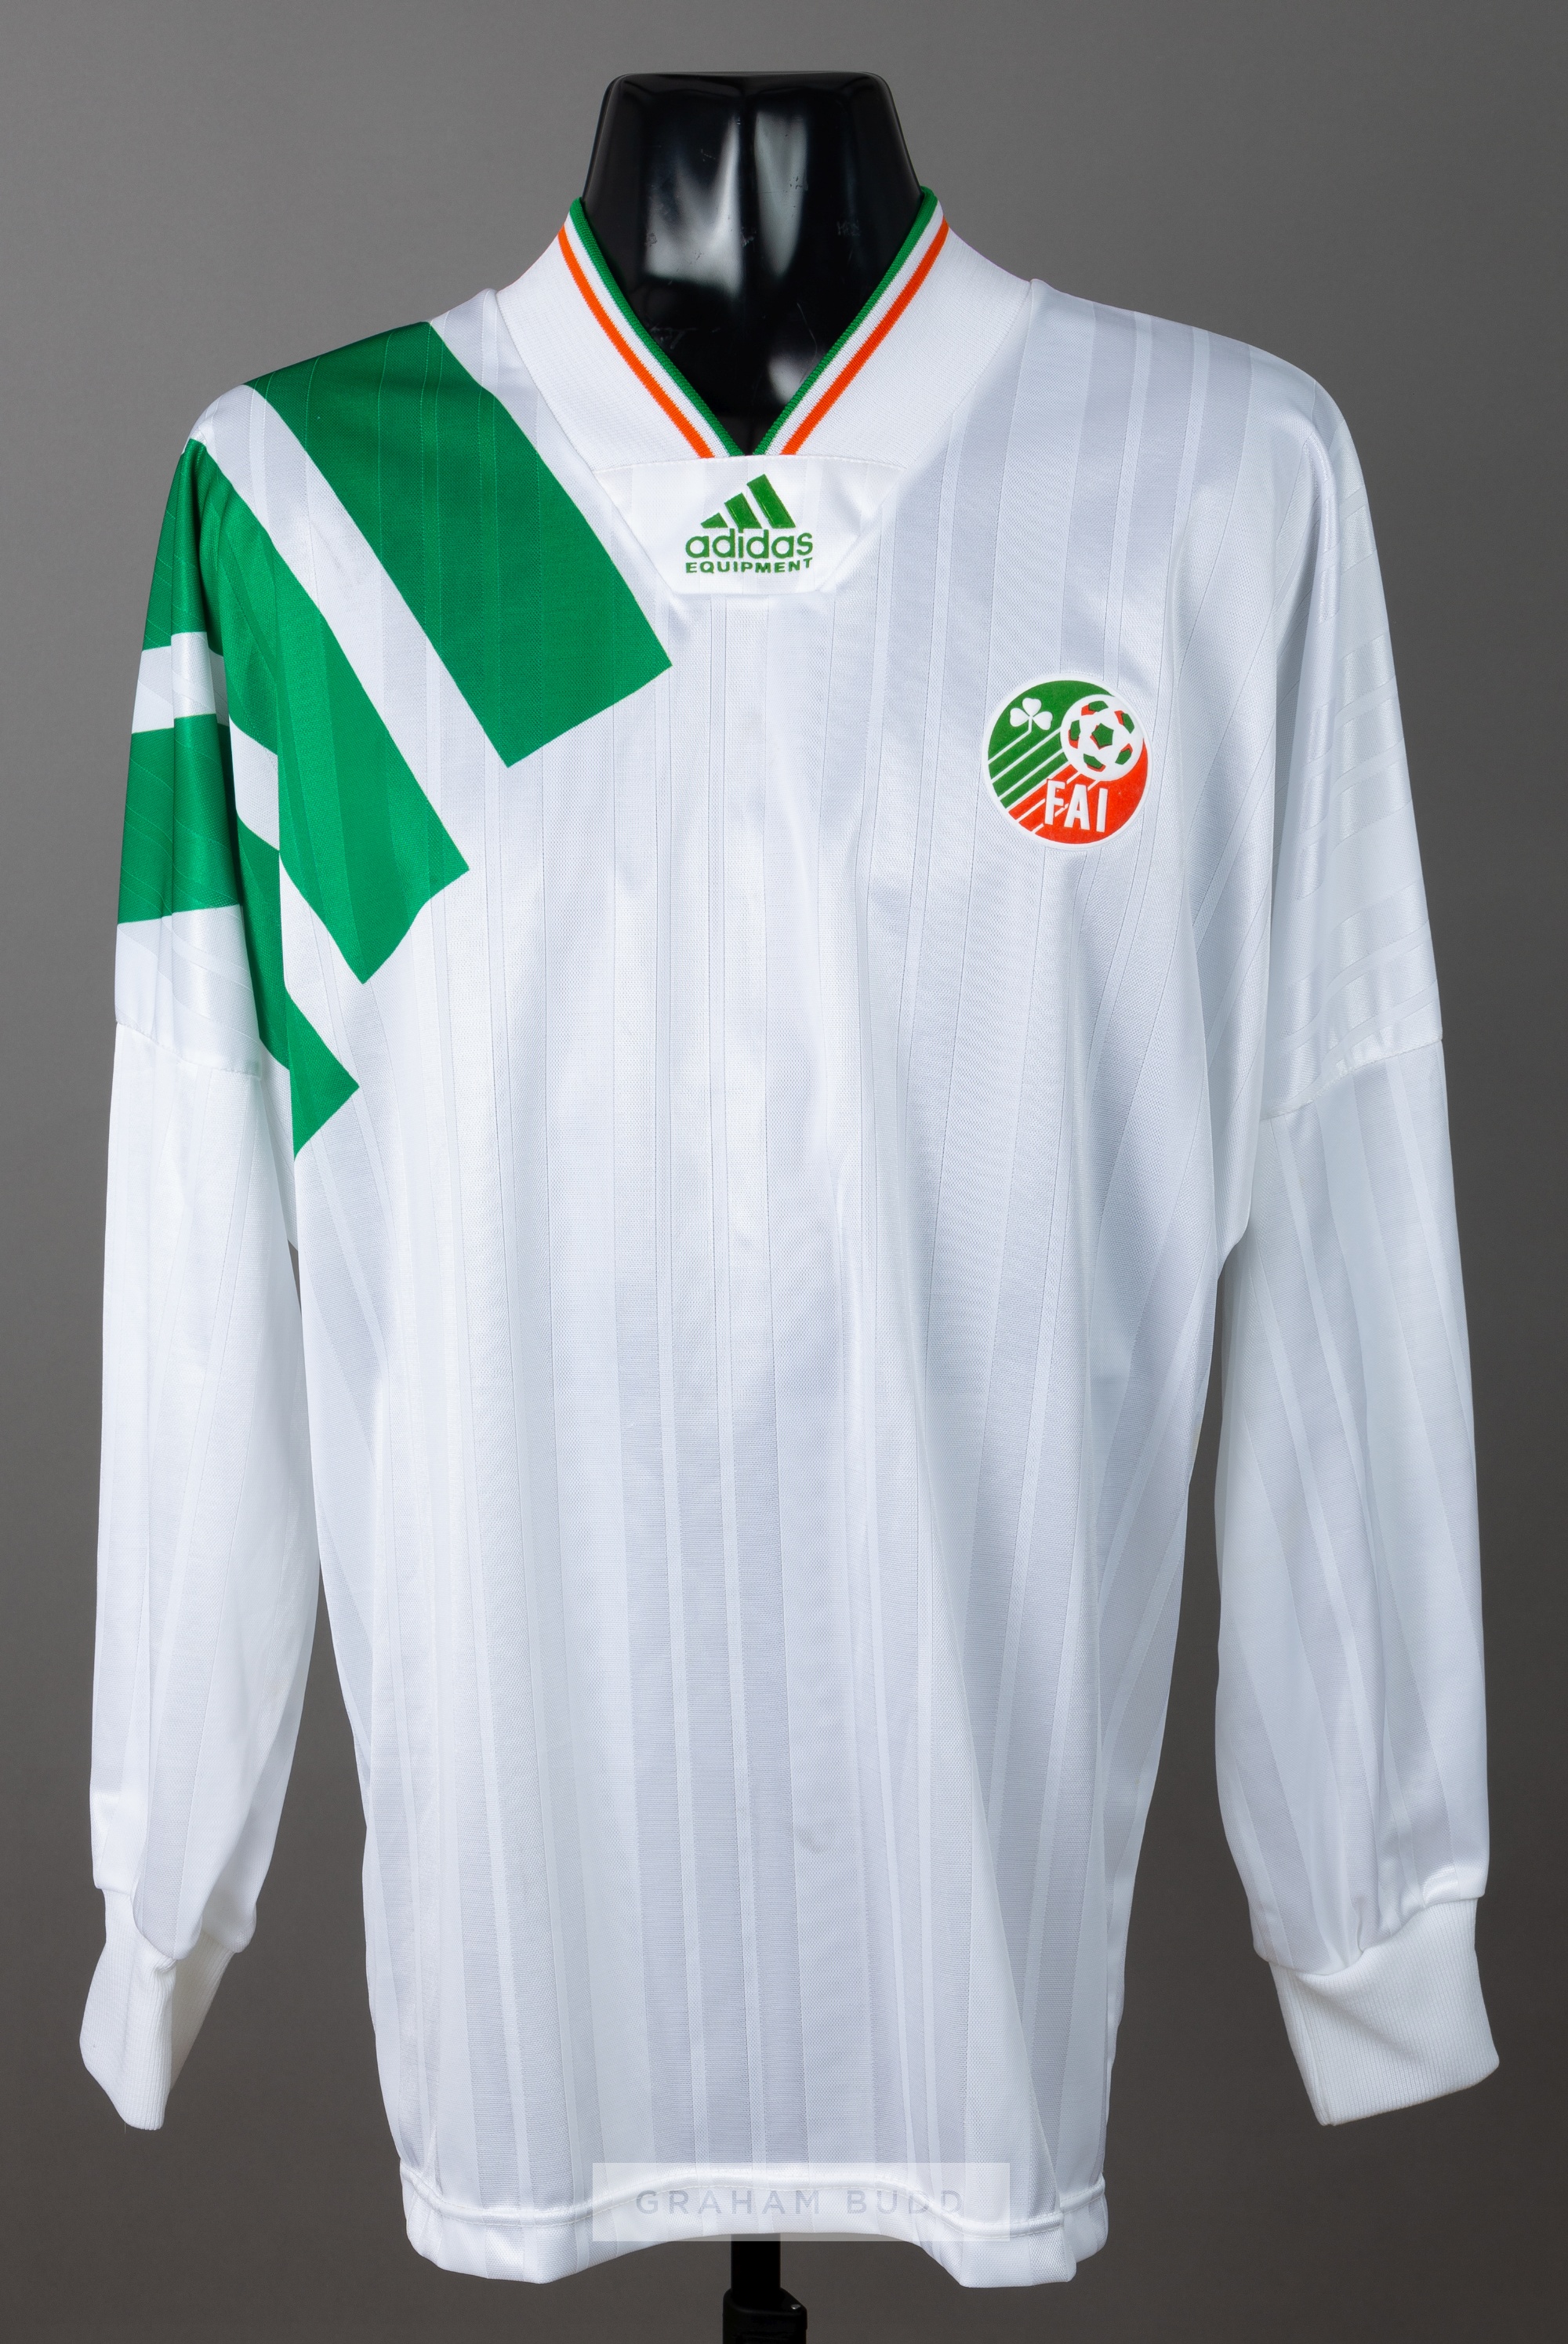 White Republic of Ireland No.22 change jersey, circa 1993, Adidas, long-sleeved with three green